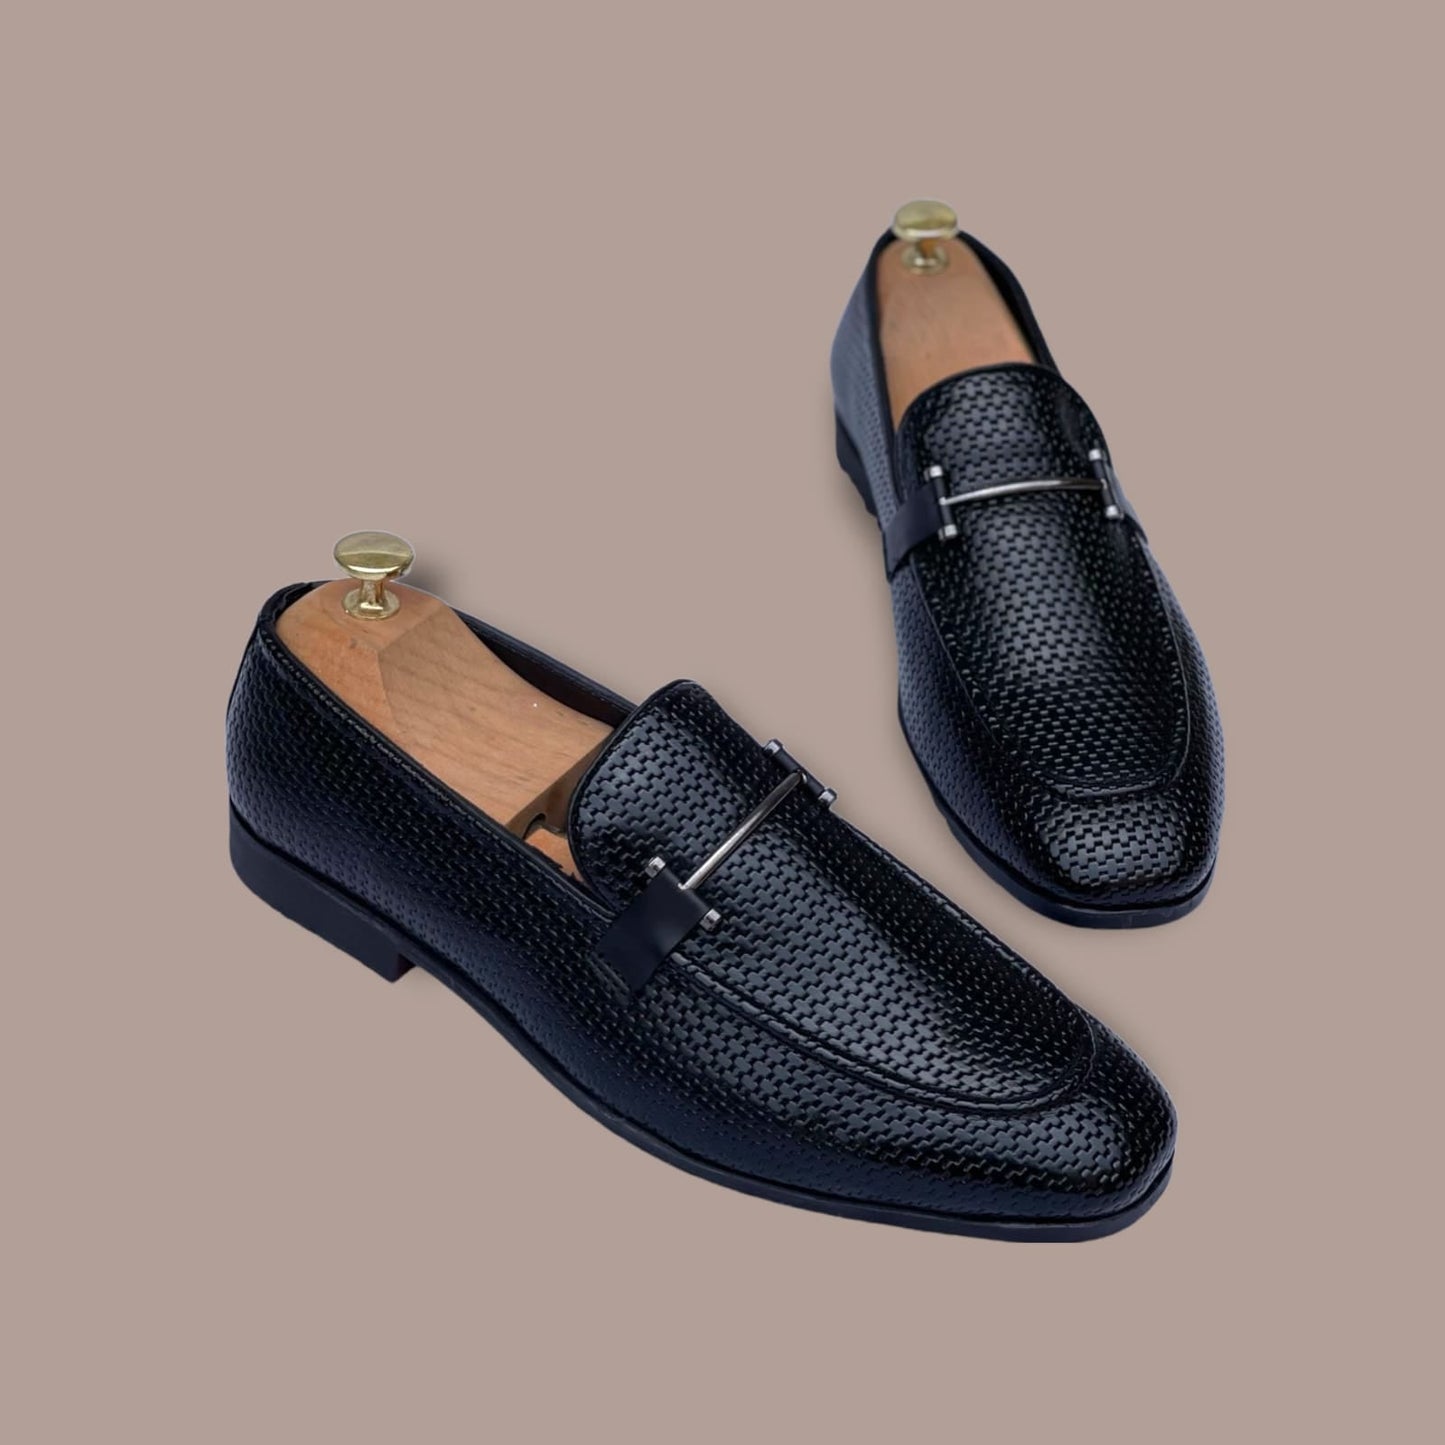 New Fashion Slip on Loafers